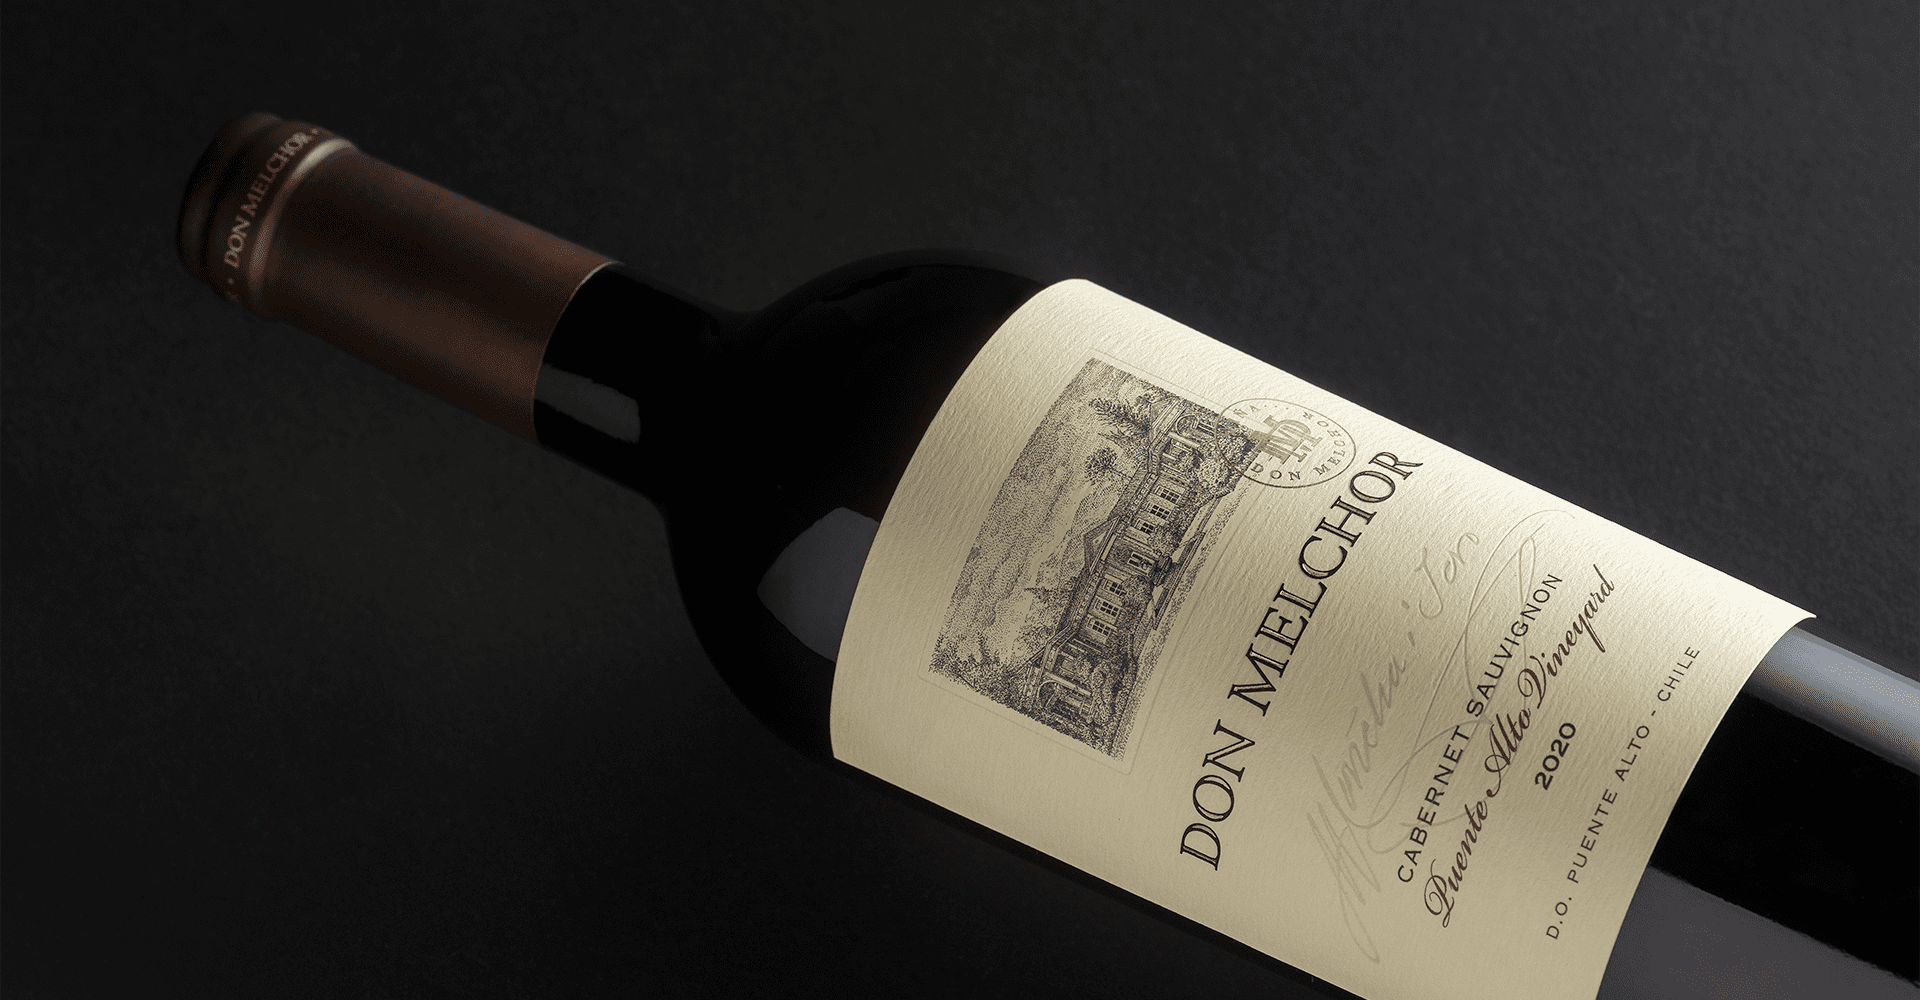 Don Melchor 2020 among James Suckling’s Top 100 Chilean wines